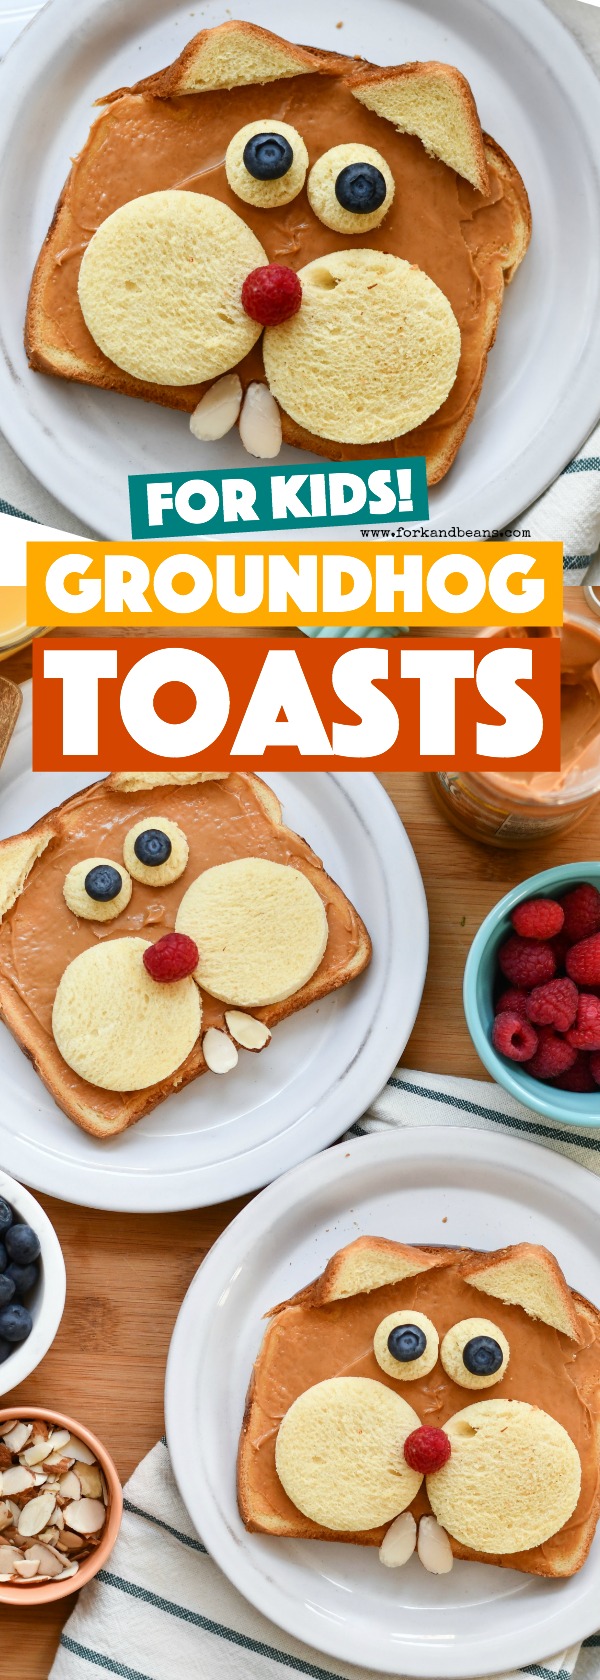 Two plates with toast made to look like groundhogs on a table with fruit in a bowl.